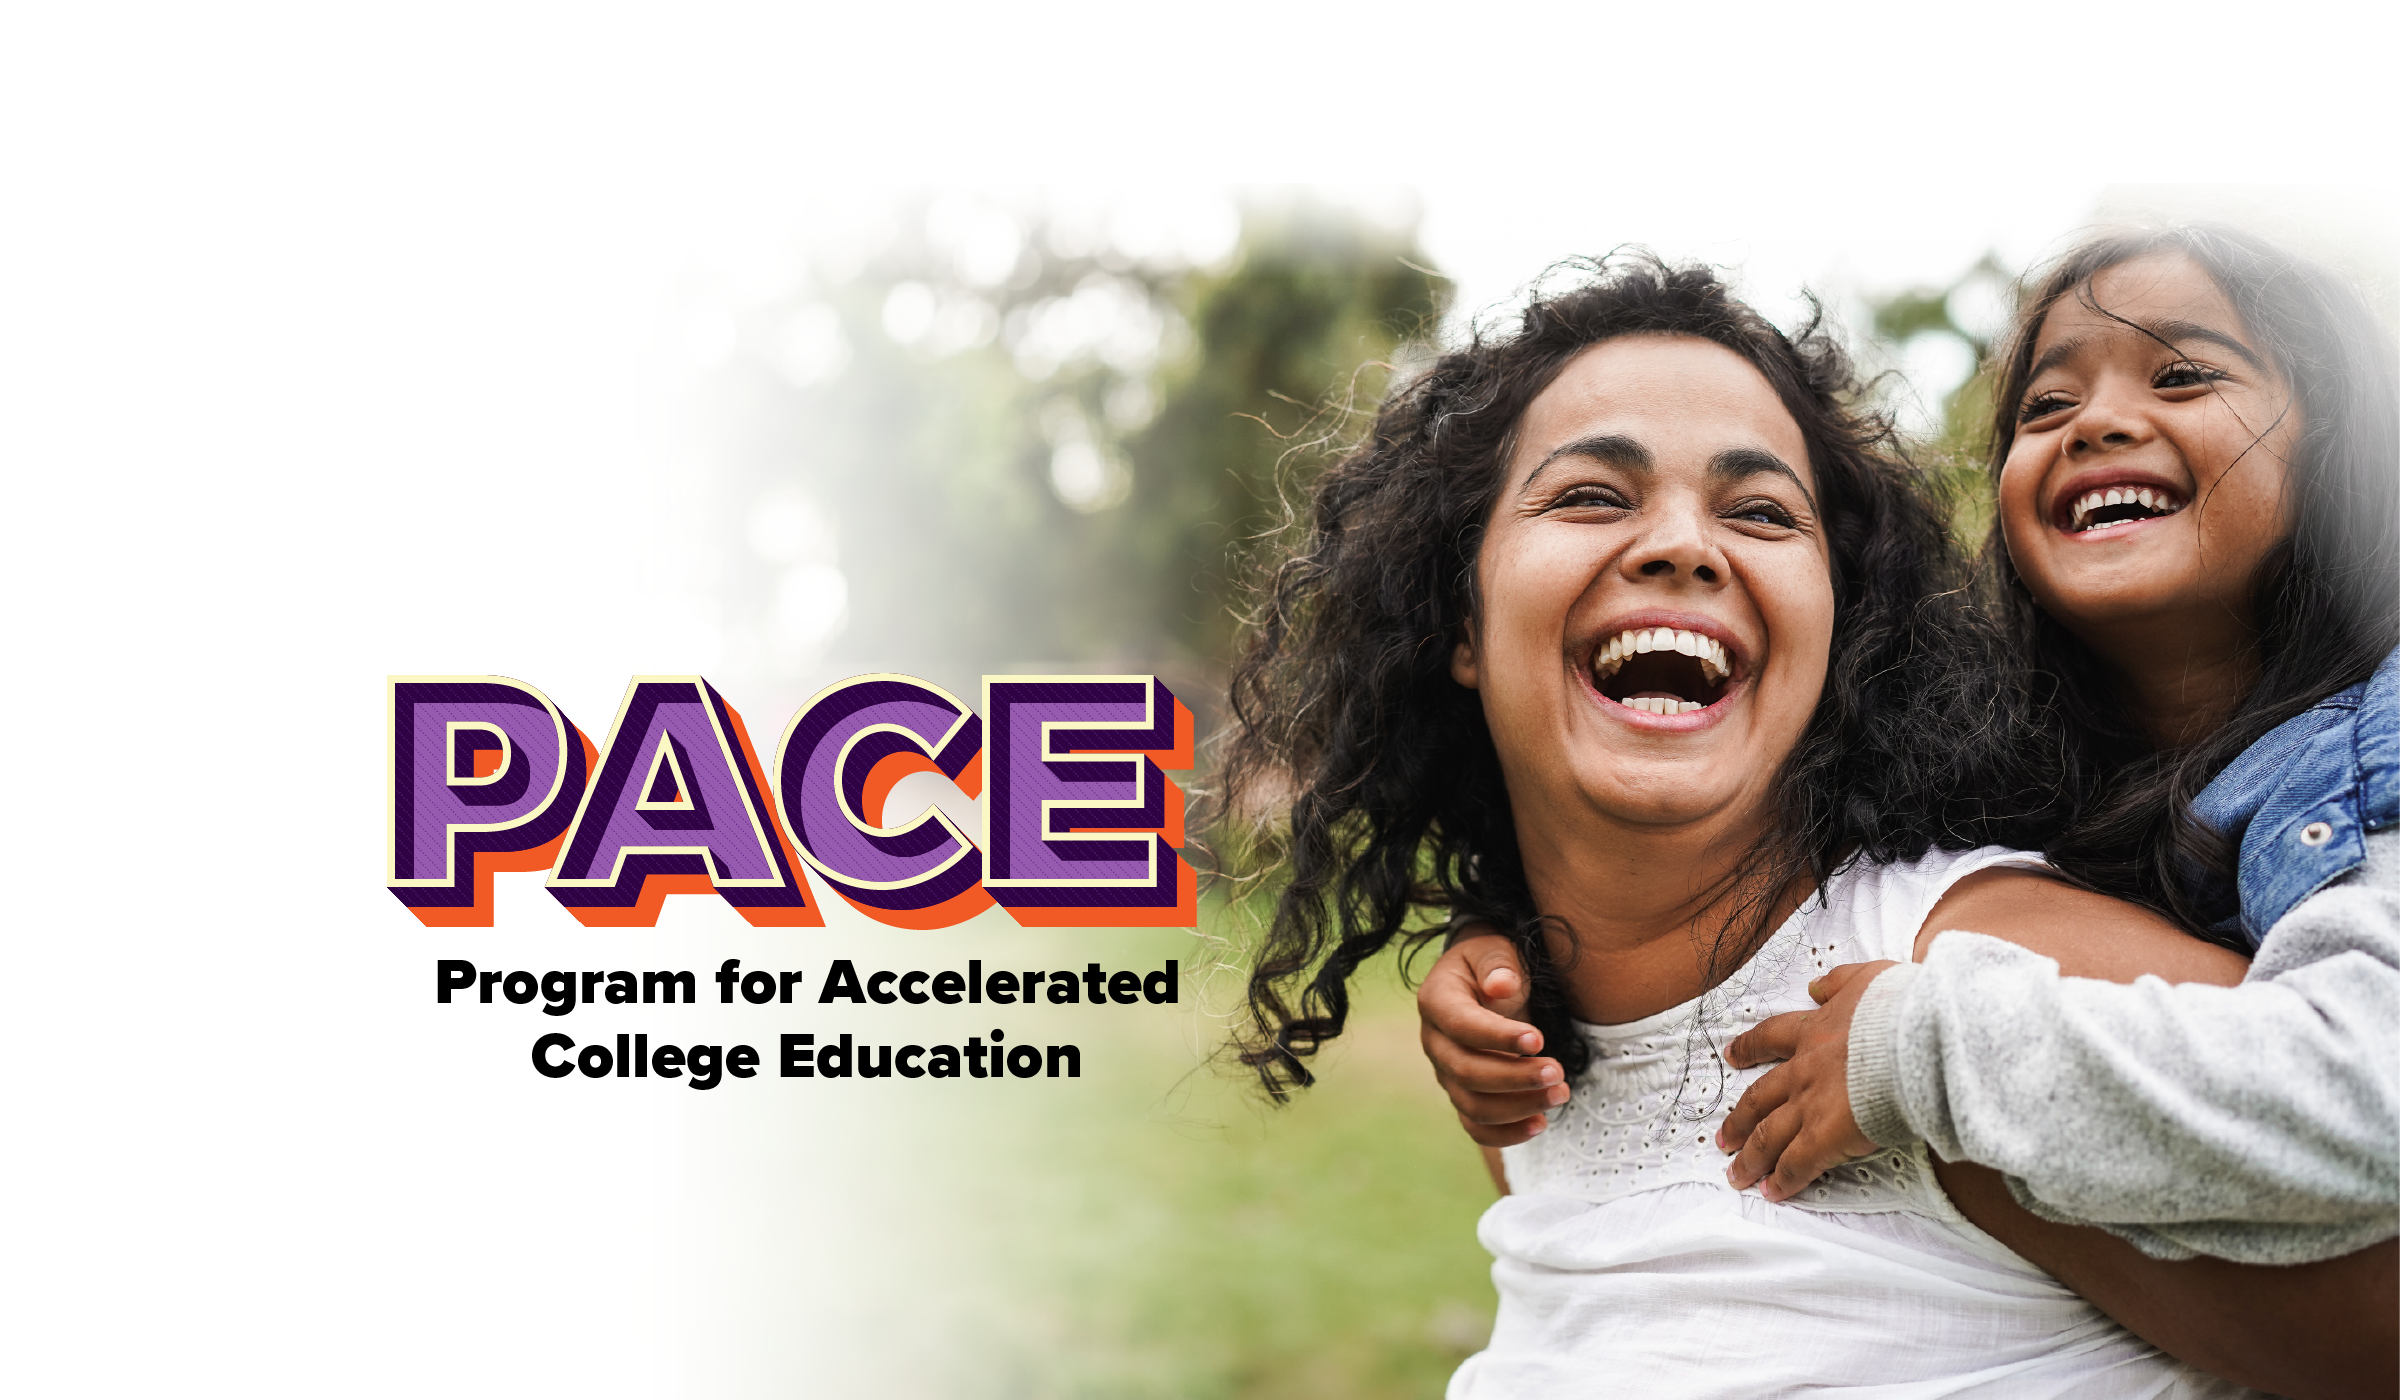 program for accelerated college education with image of a mom and young daughter